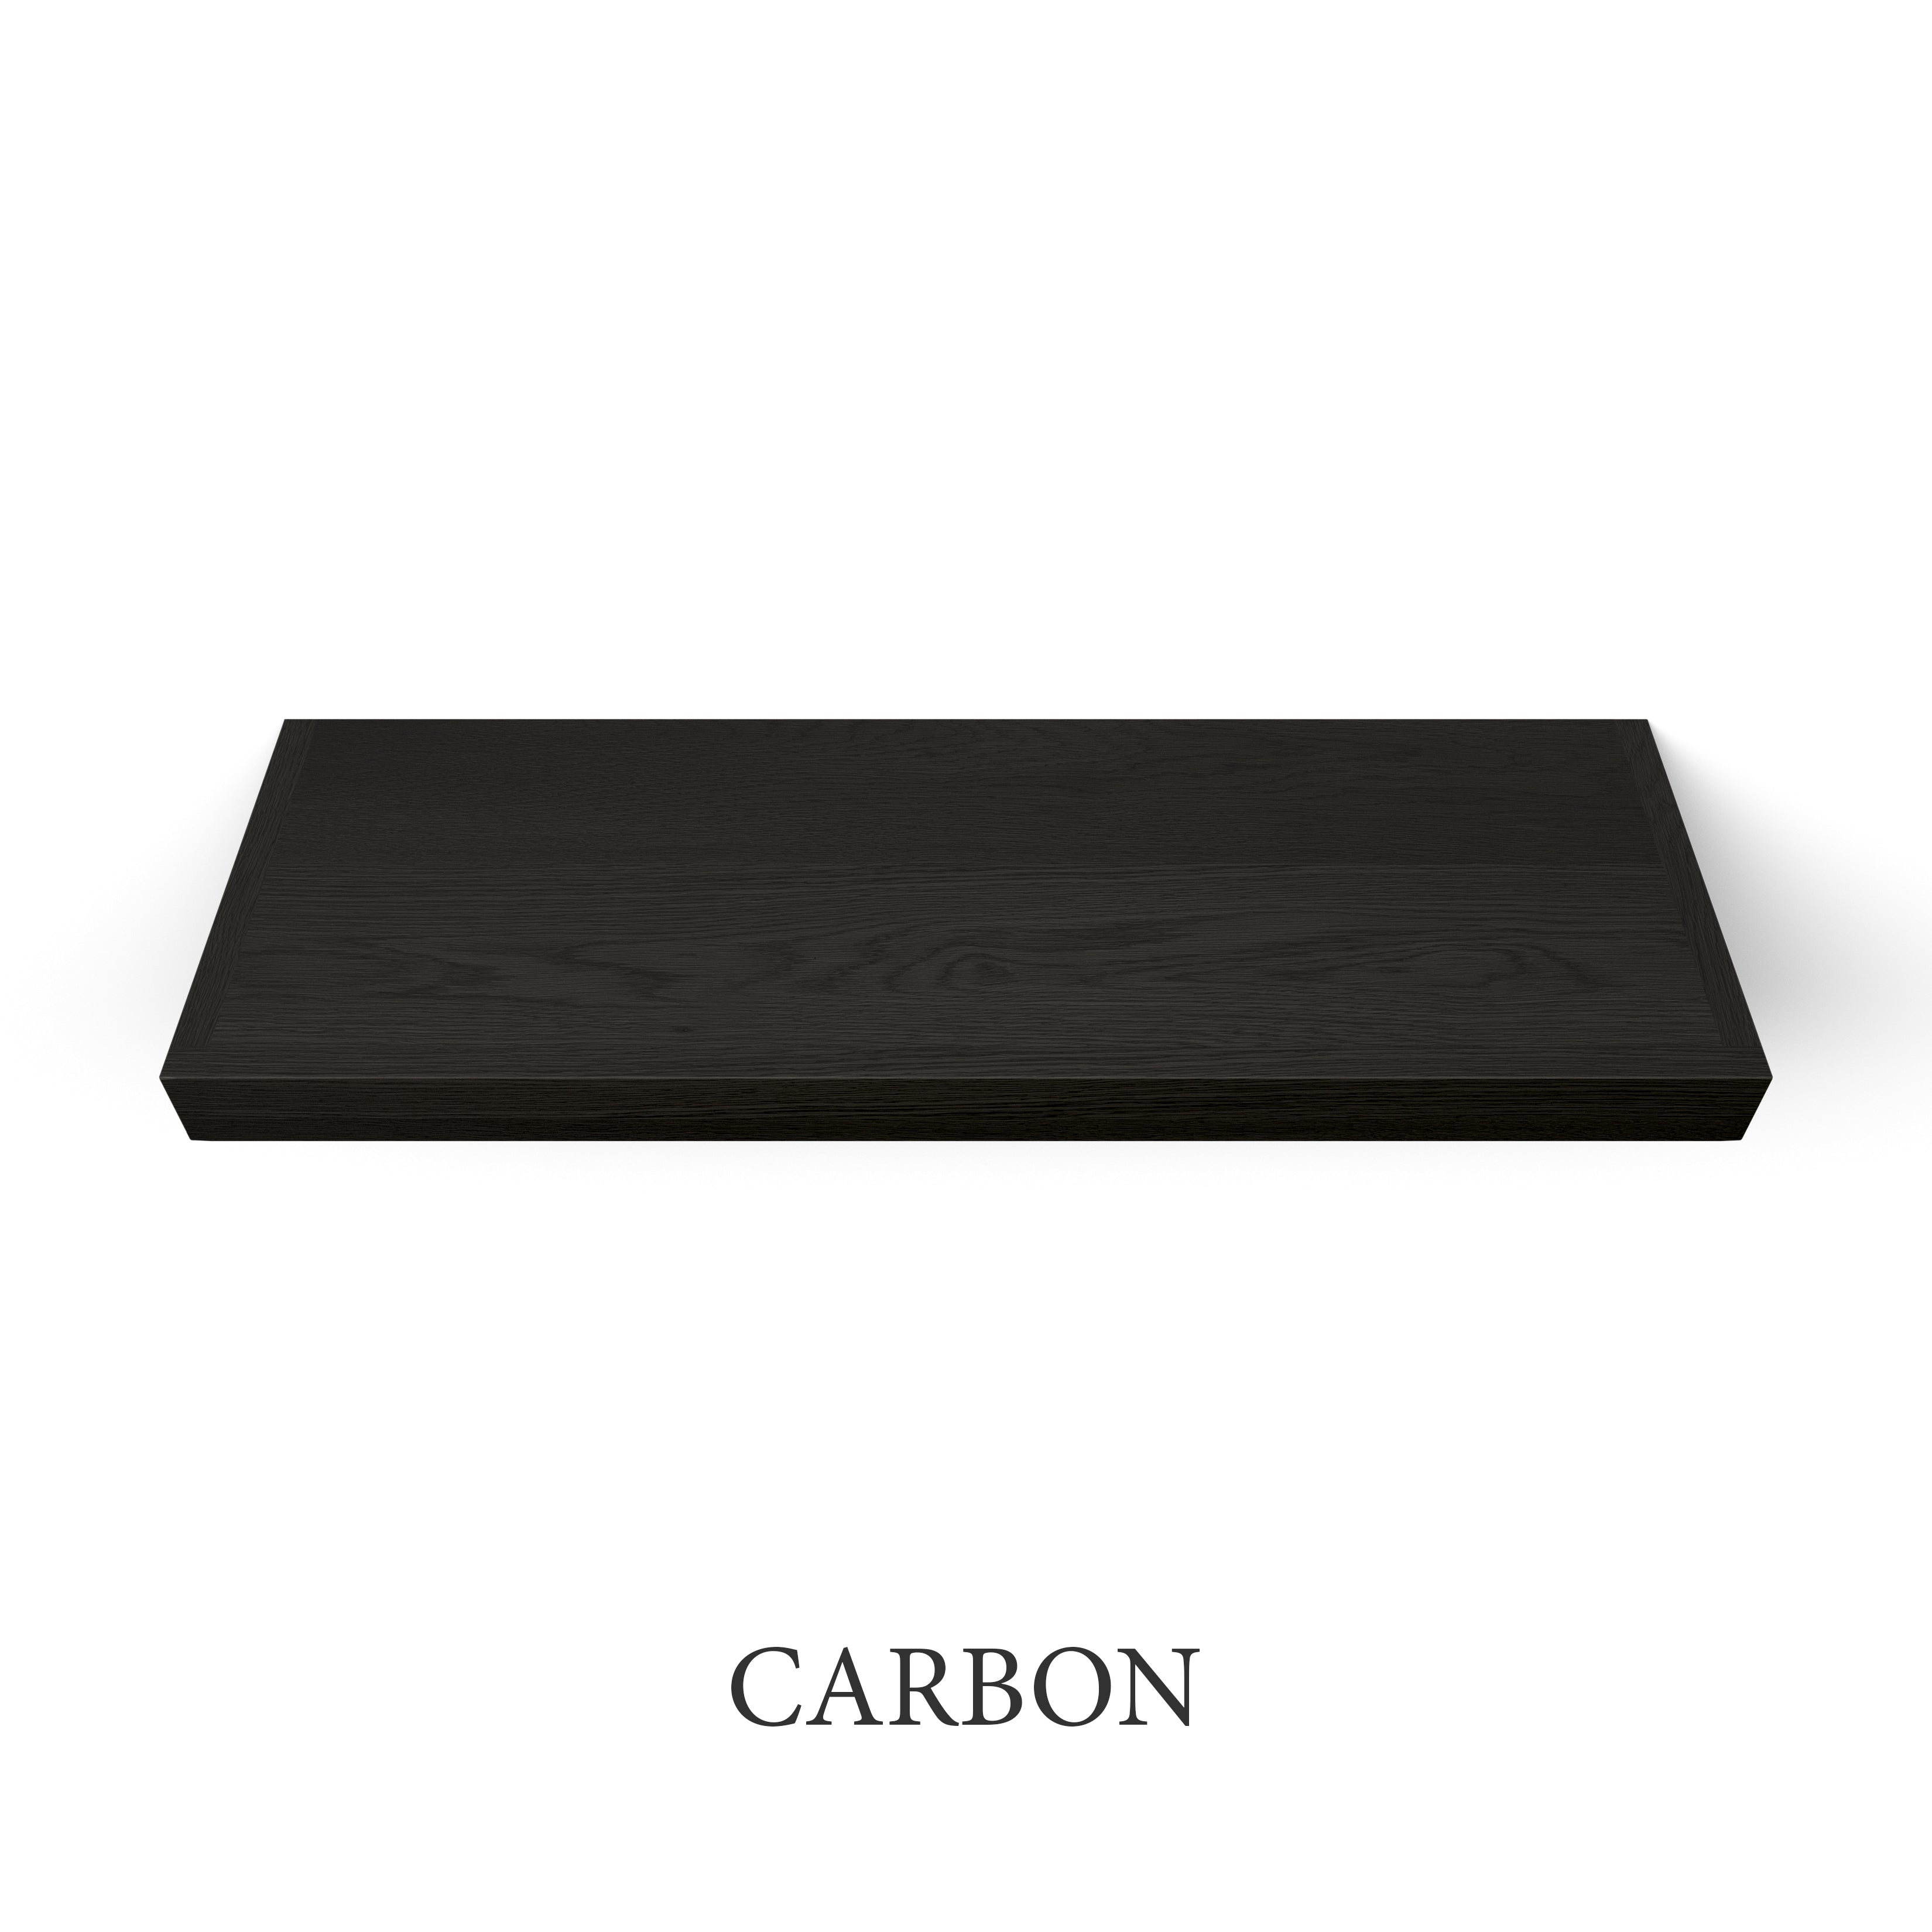 carbon White Oak 2 Inch Thick Floating Shelf